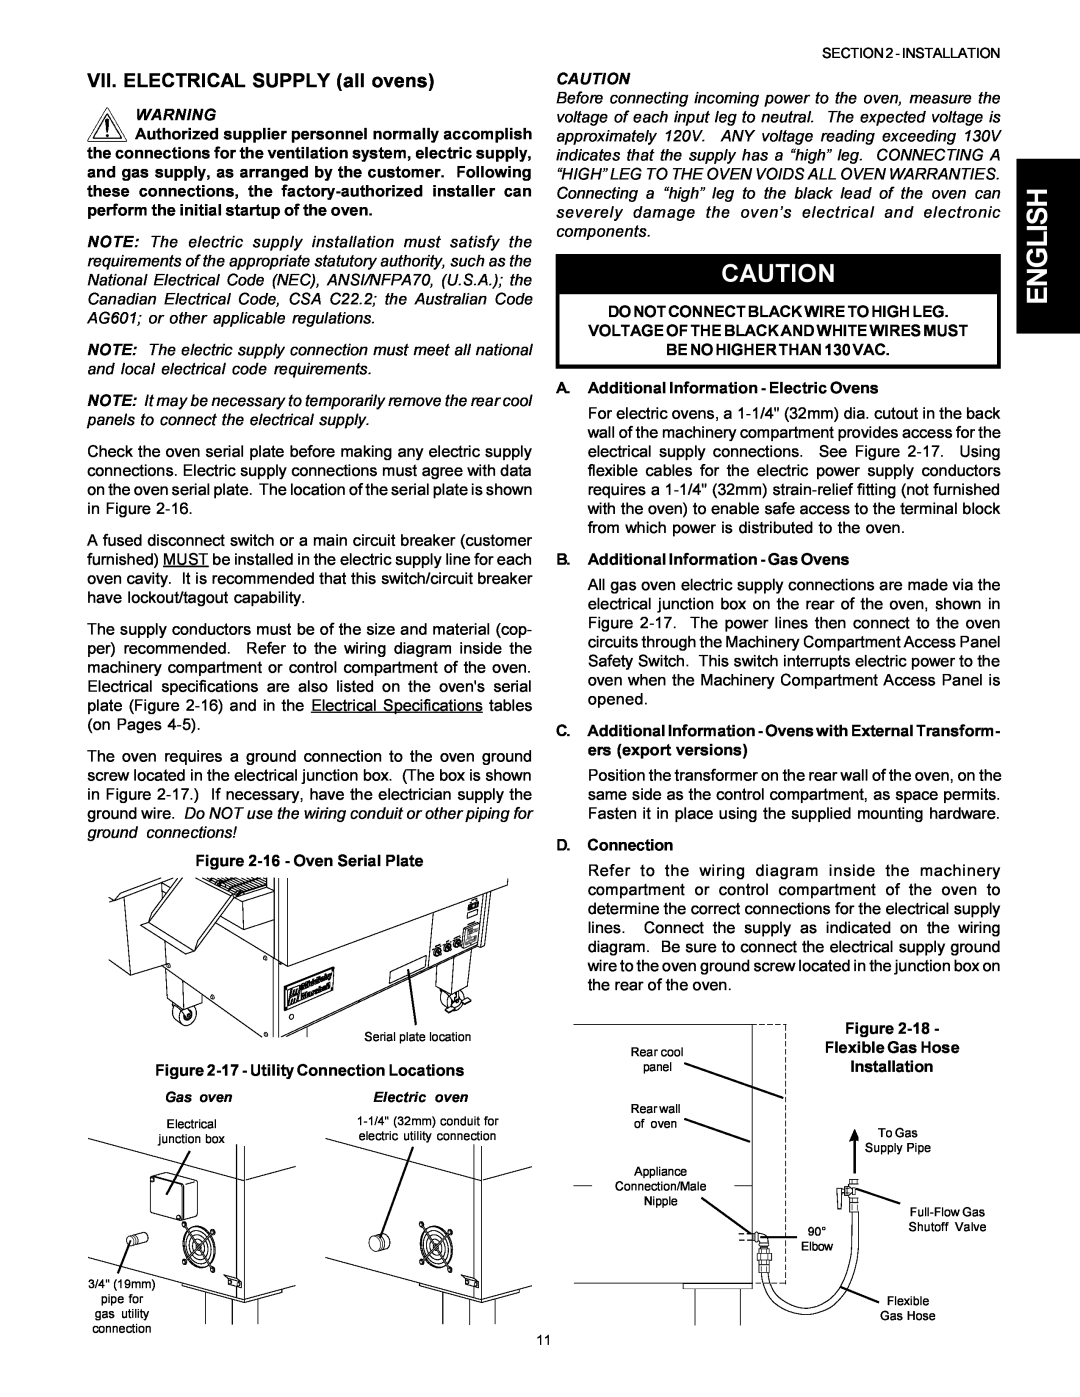 Middleby Marshall PS314SBI installation manual English, VII. ELECTRICAL SUPPLY all ovens 